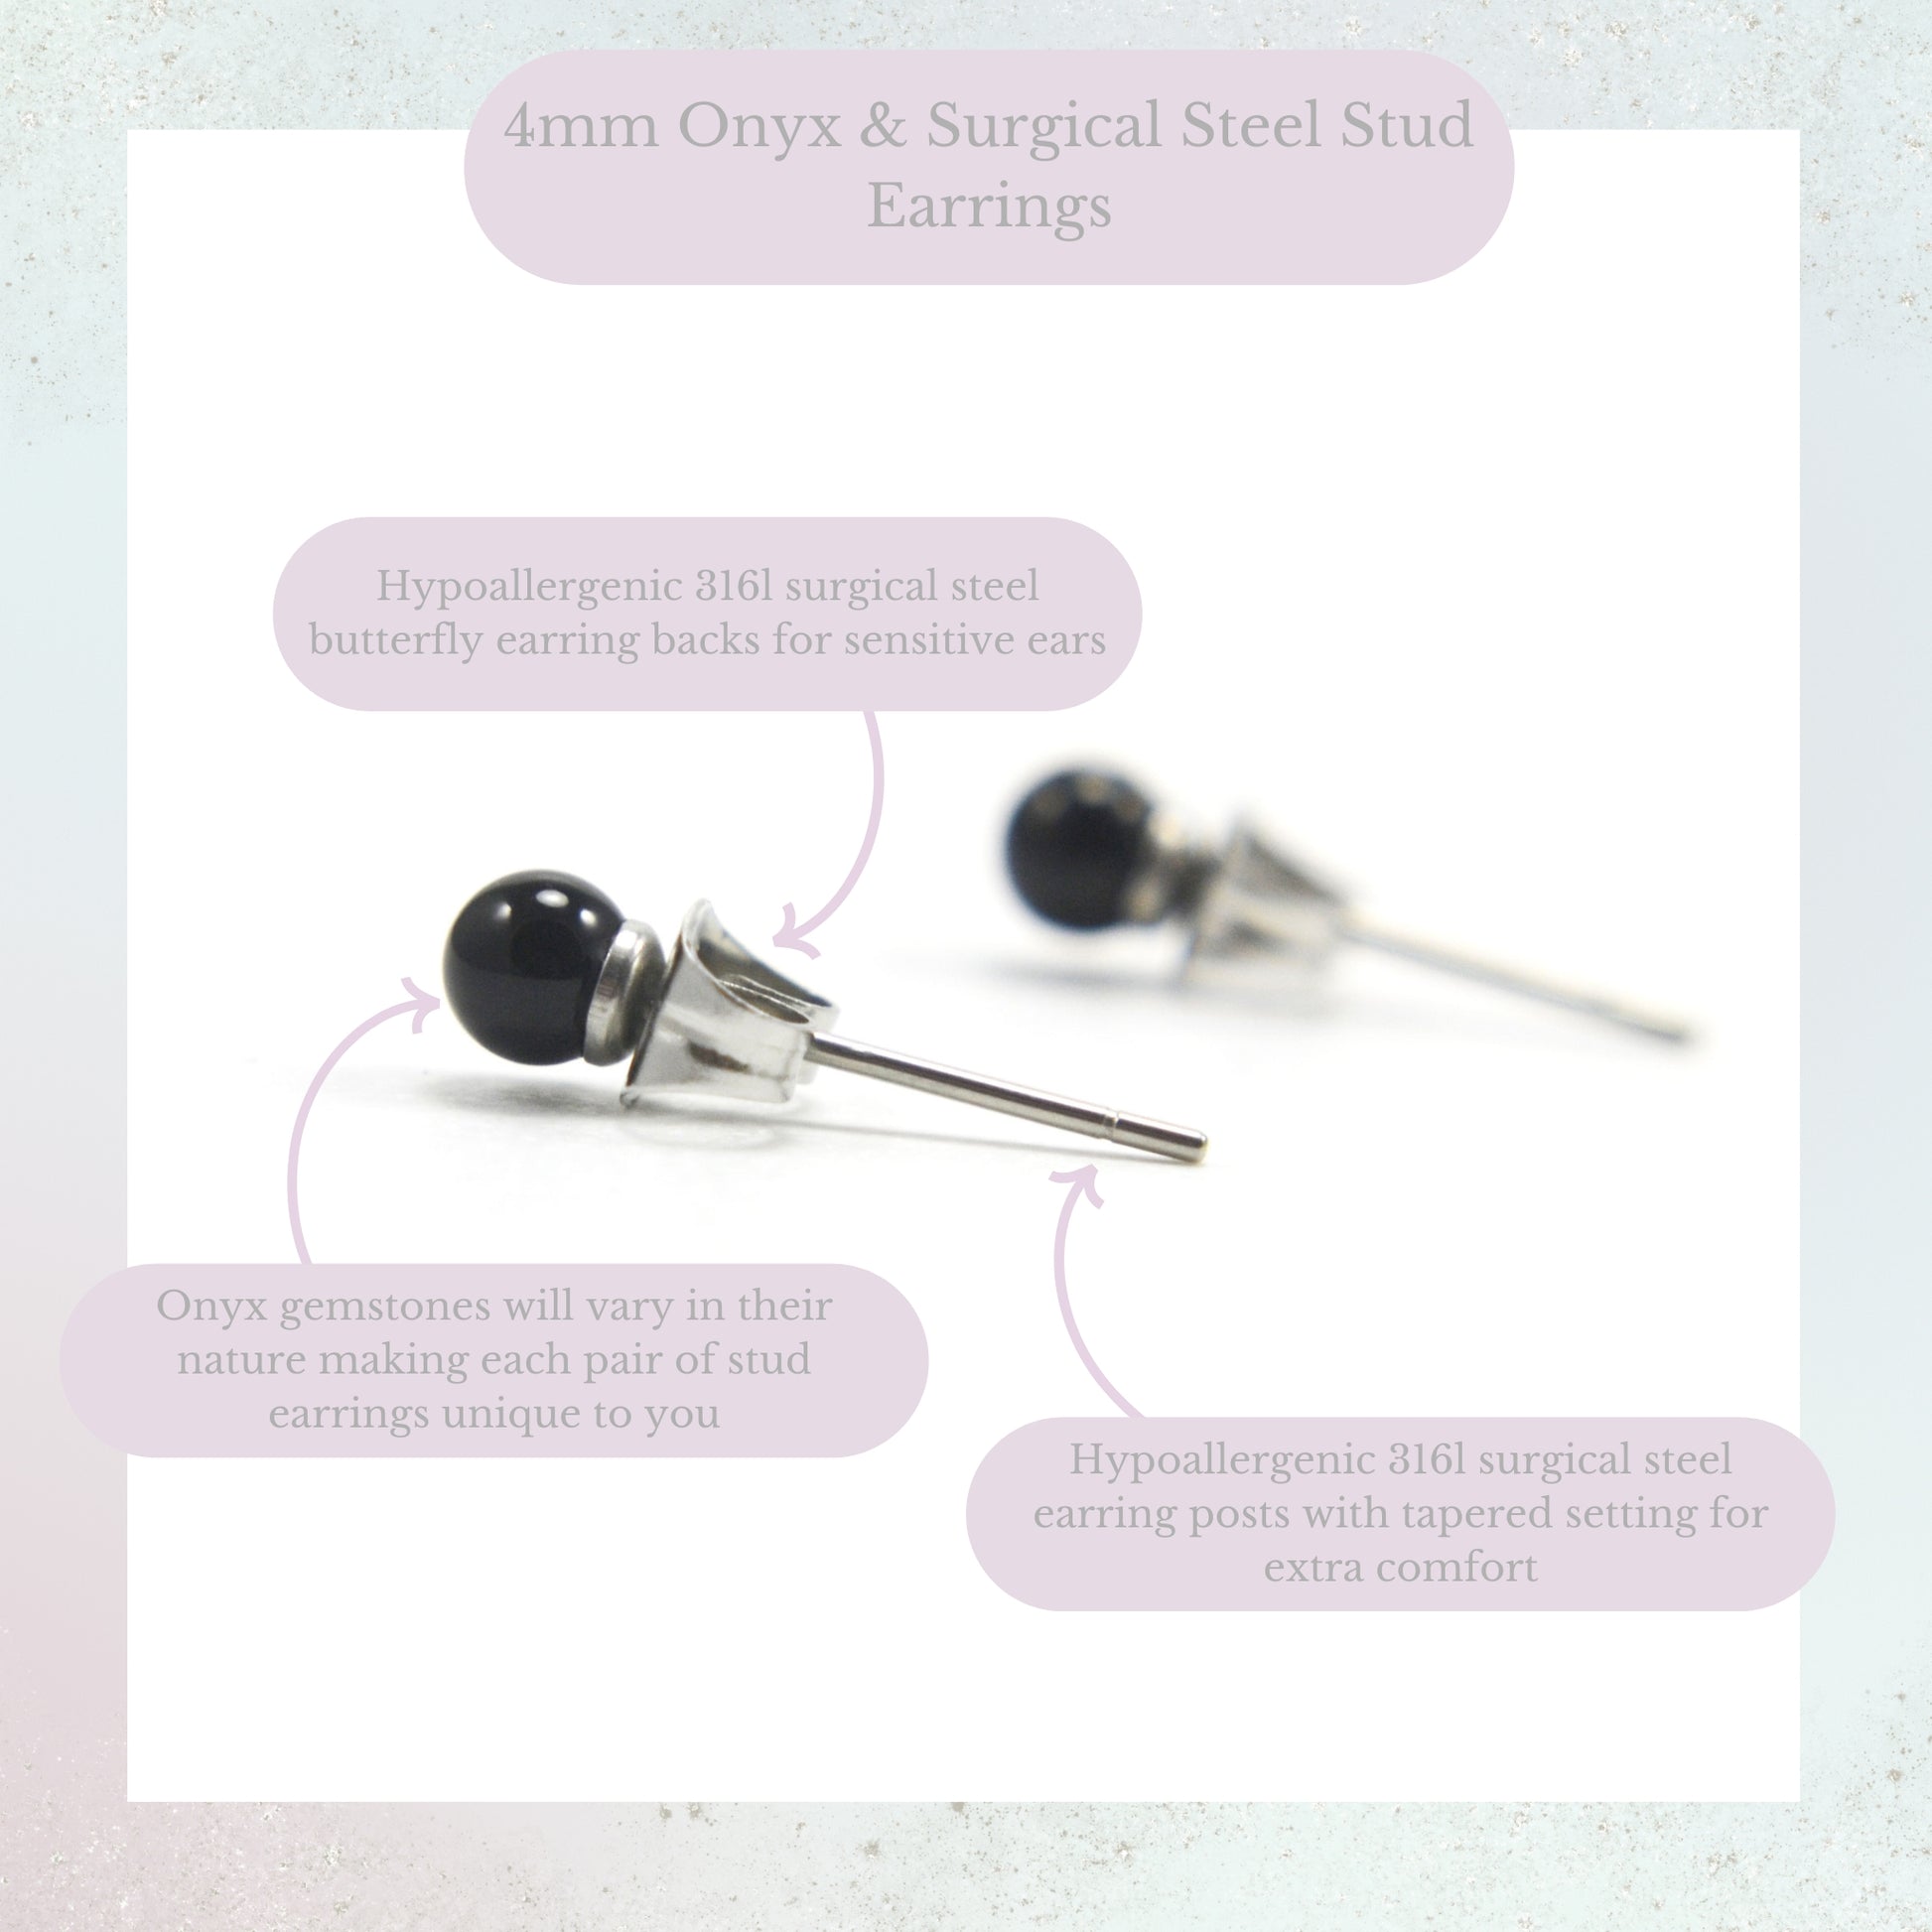 Product information graphic for 4mm Onyx & surgical steel stud earrings